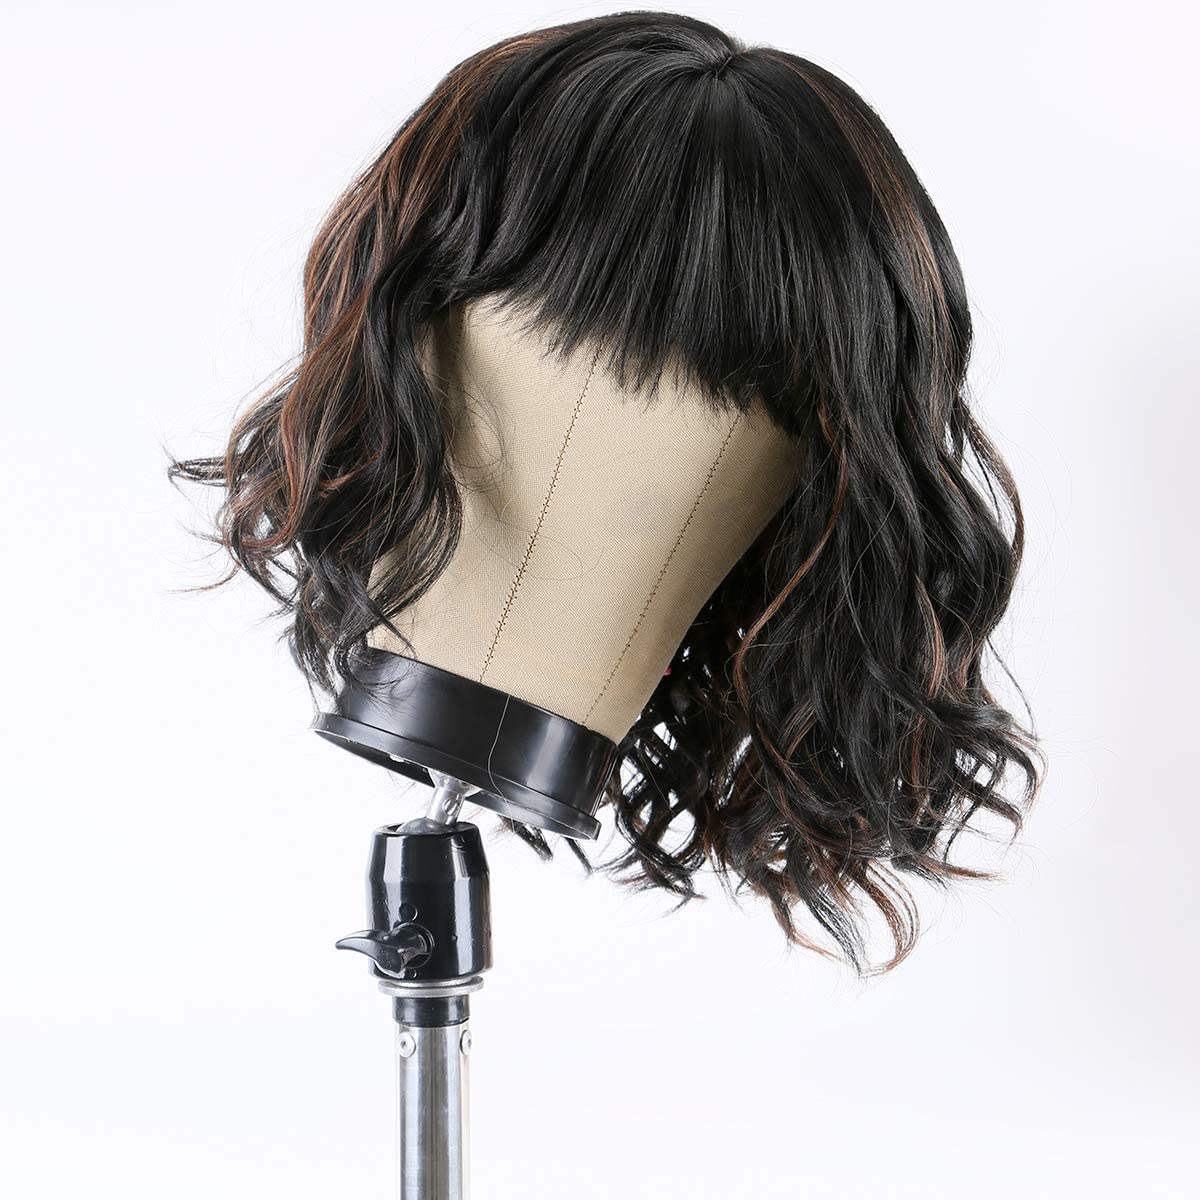 bob hairstyles with bangs,bobs for thin hair with bangs short bob with bangs parisian bob,parisian bob hair wigs with bangs,wigs for white women,short hair with layers,Black bob Wig Length: 12 inch Full Machine Wig